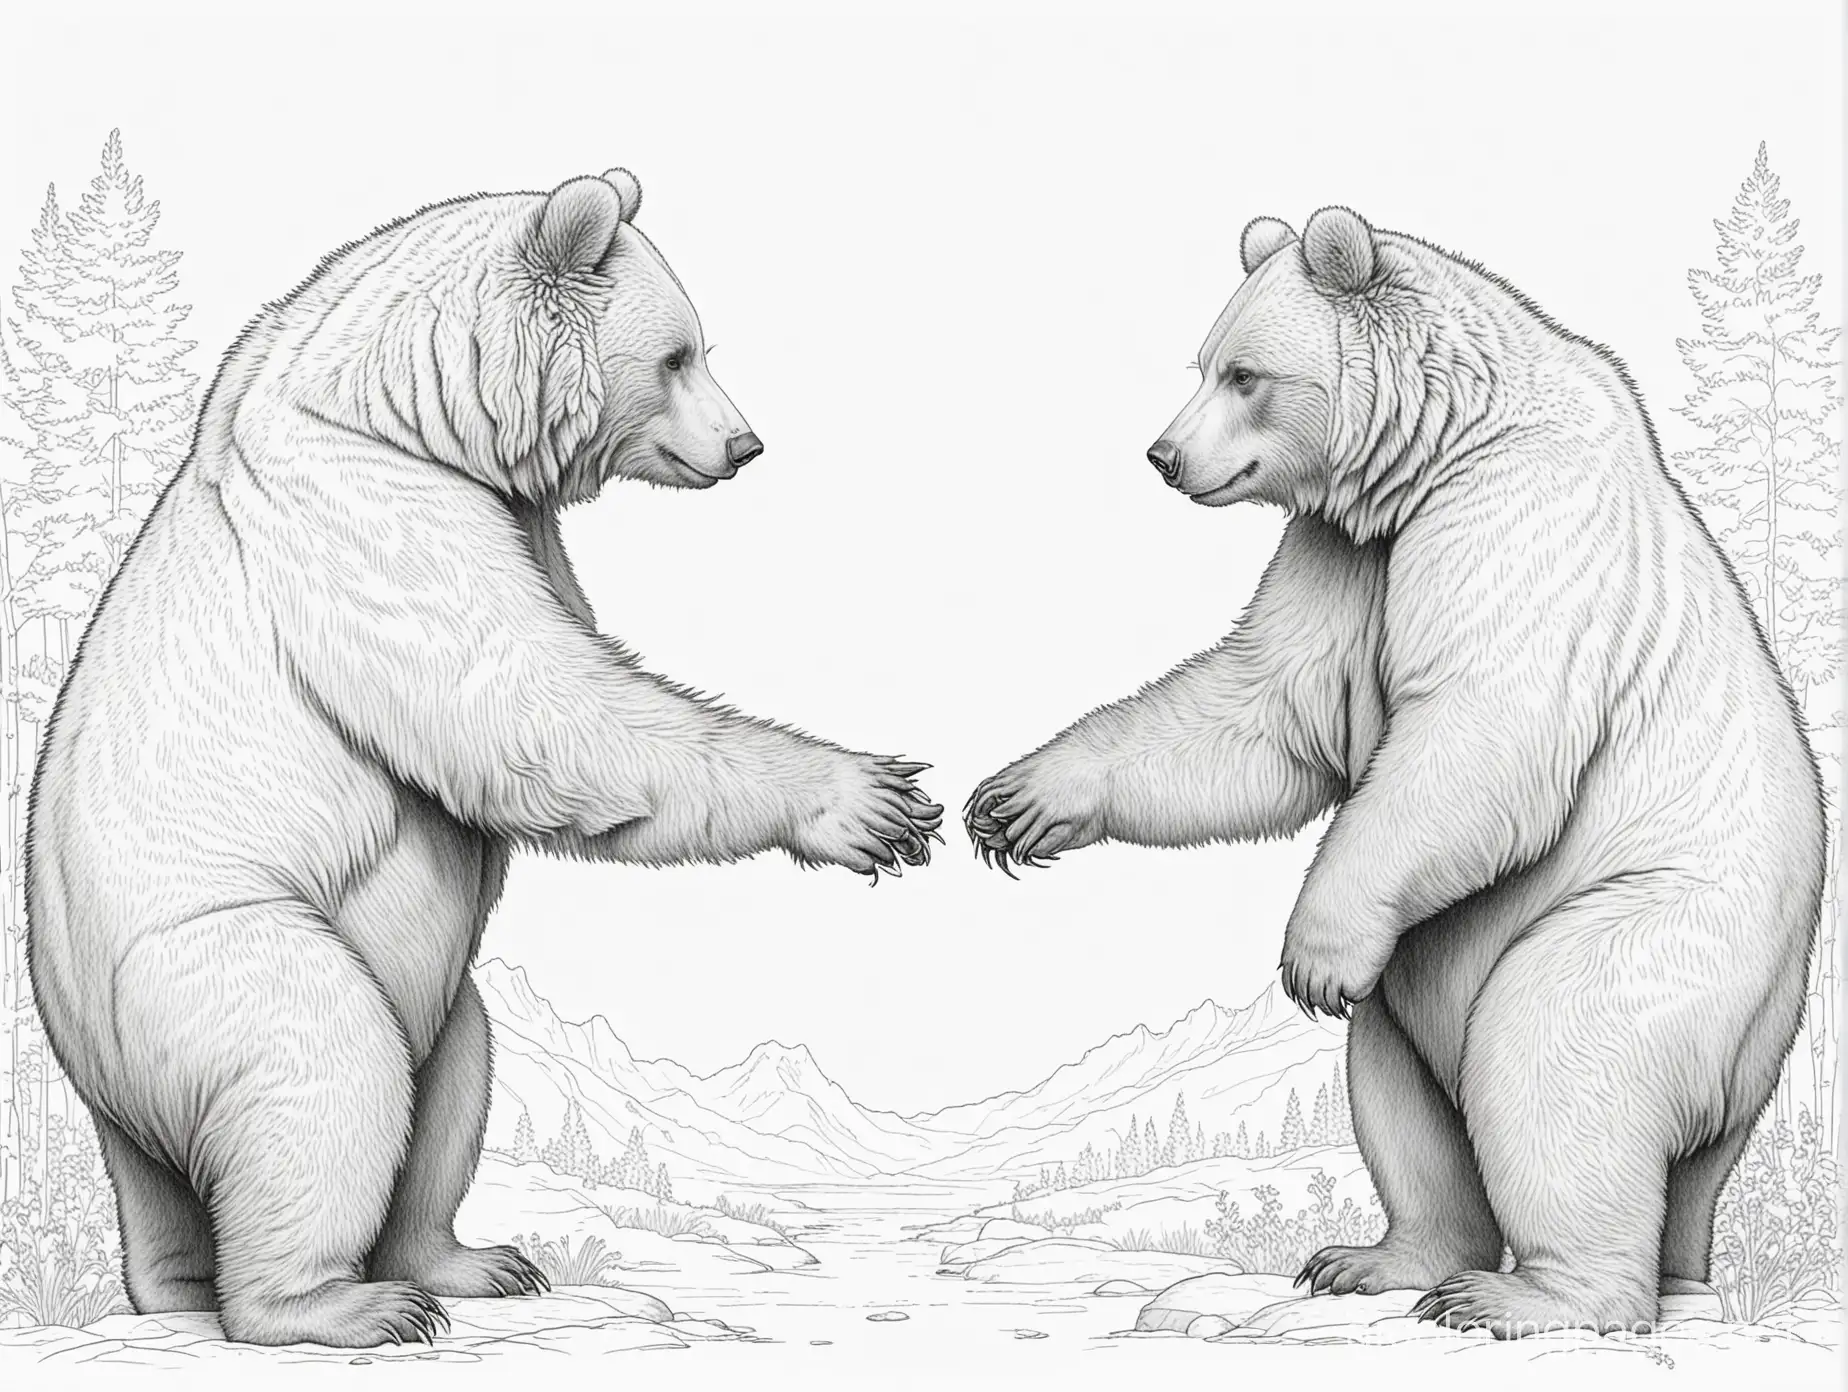 Two grizzly bears giving each other a hand shake, Coloring Page, black and white, line art, white background, Simplicity, Ample White Space. The background of the coloring page is plain white to make it easy for young children to color within the lines. The outlines of all the subjects are easy to distinguish, making it simple for kids to color without too much difficulty